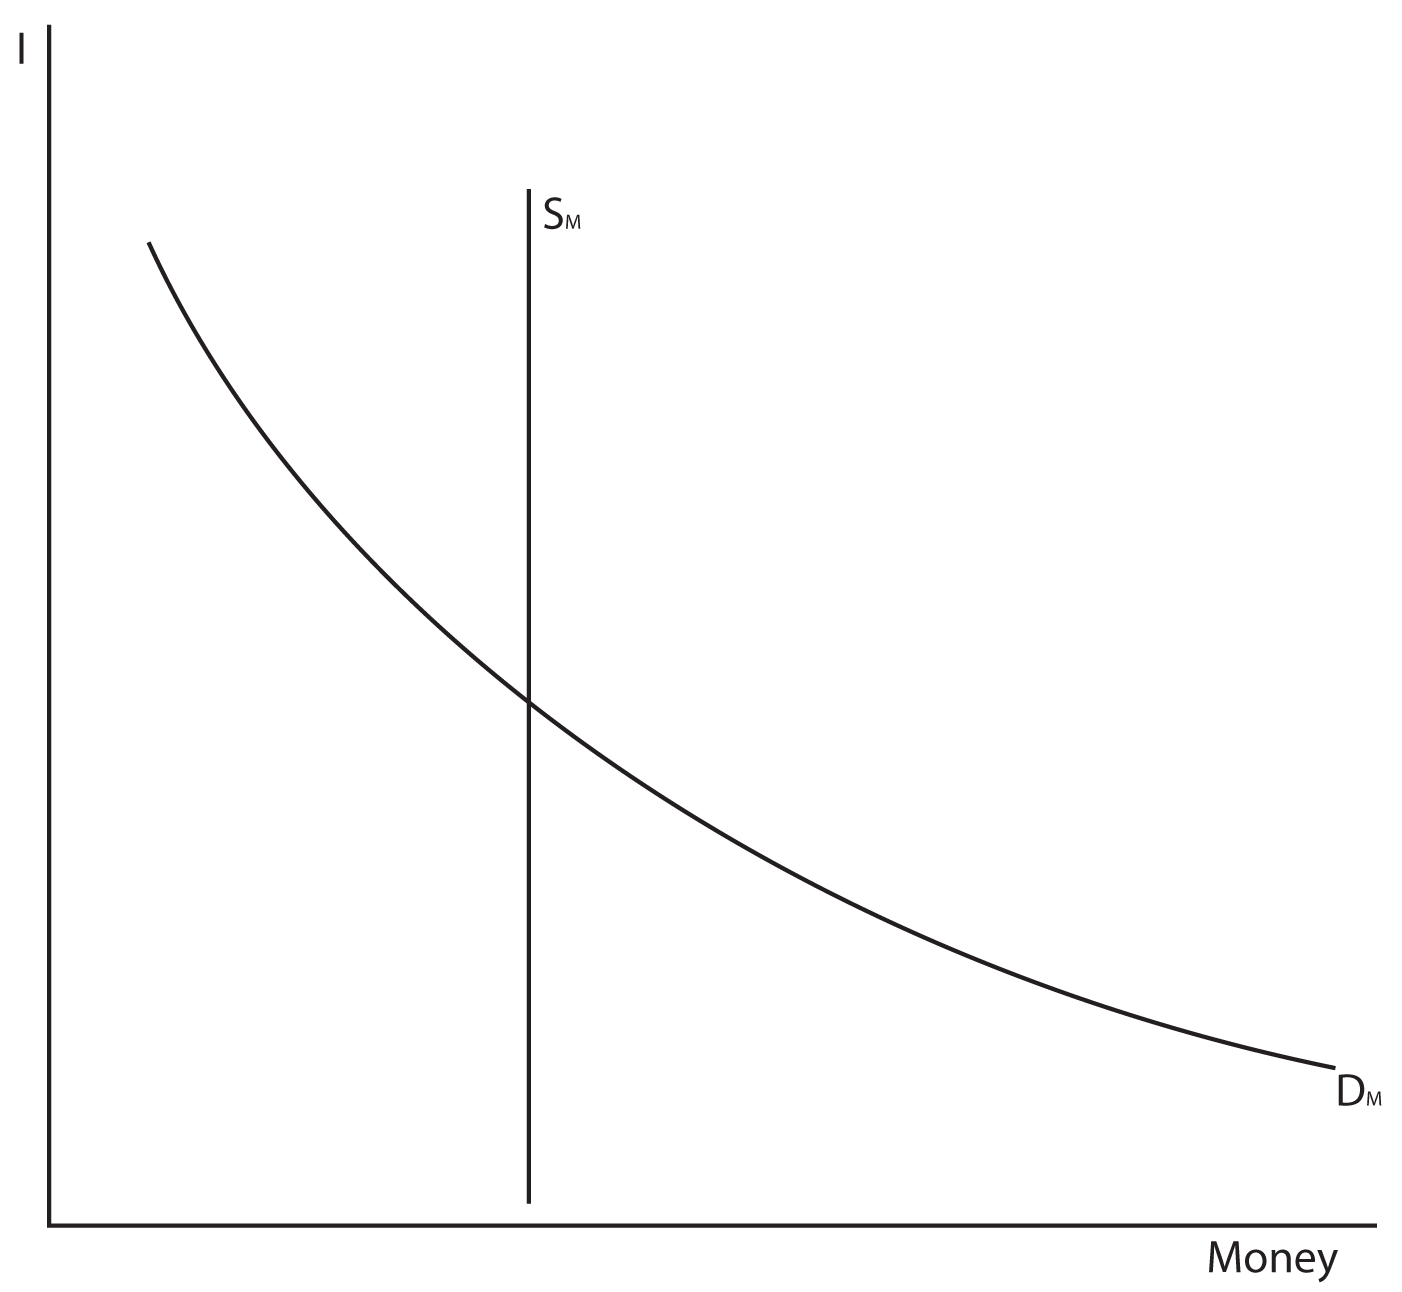 10.02
This graph shows money on the X axis and I on the Y axis.  A vertical line labeled S M (meaning Supply of Money) sits in the middle of the graph.  A curved line labeled D M (meaning Demand for Money) slopes downward from the Y axis and is concave away from the origin.  
The vertical line (S M) crosses the curved line at about its midpoint.  